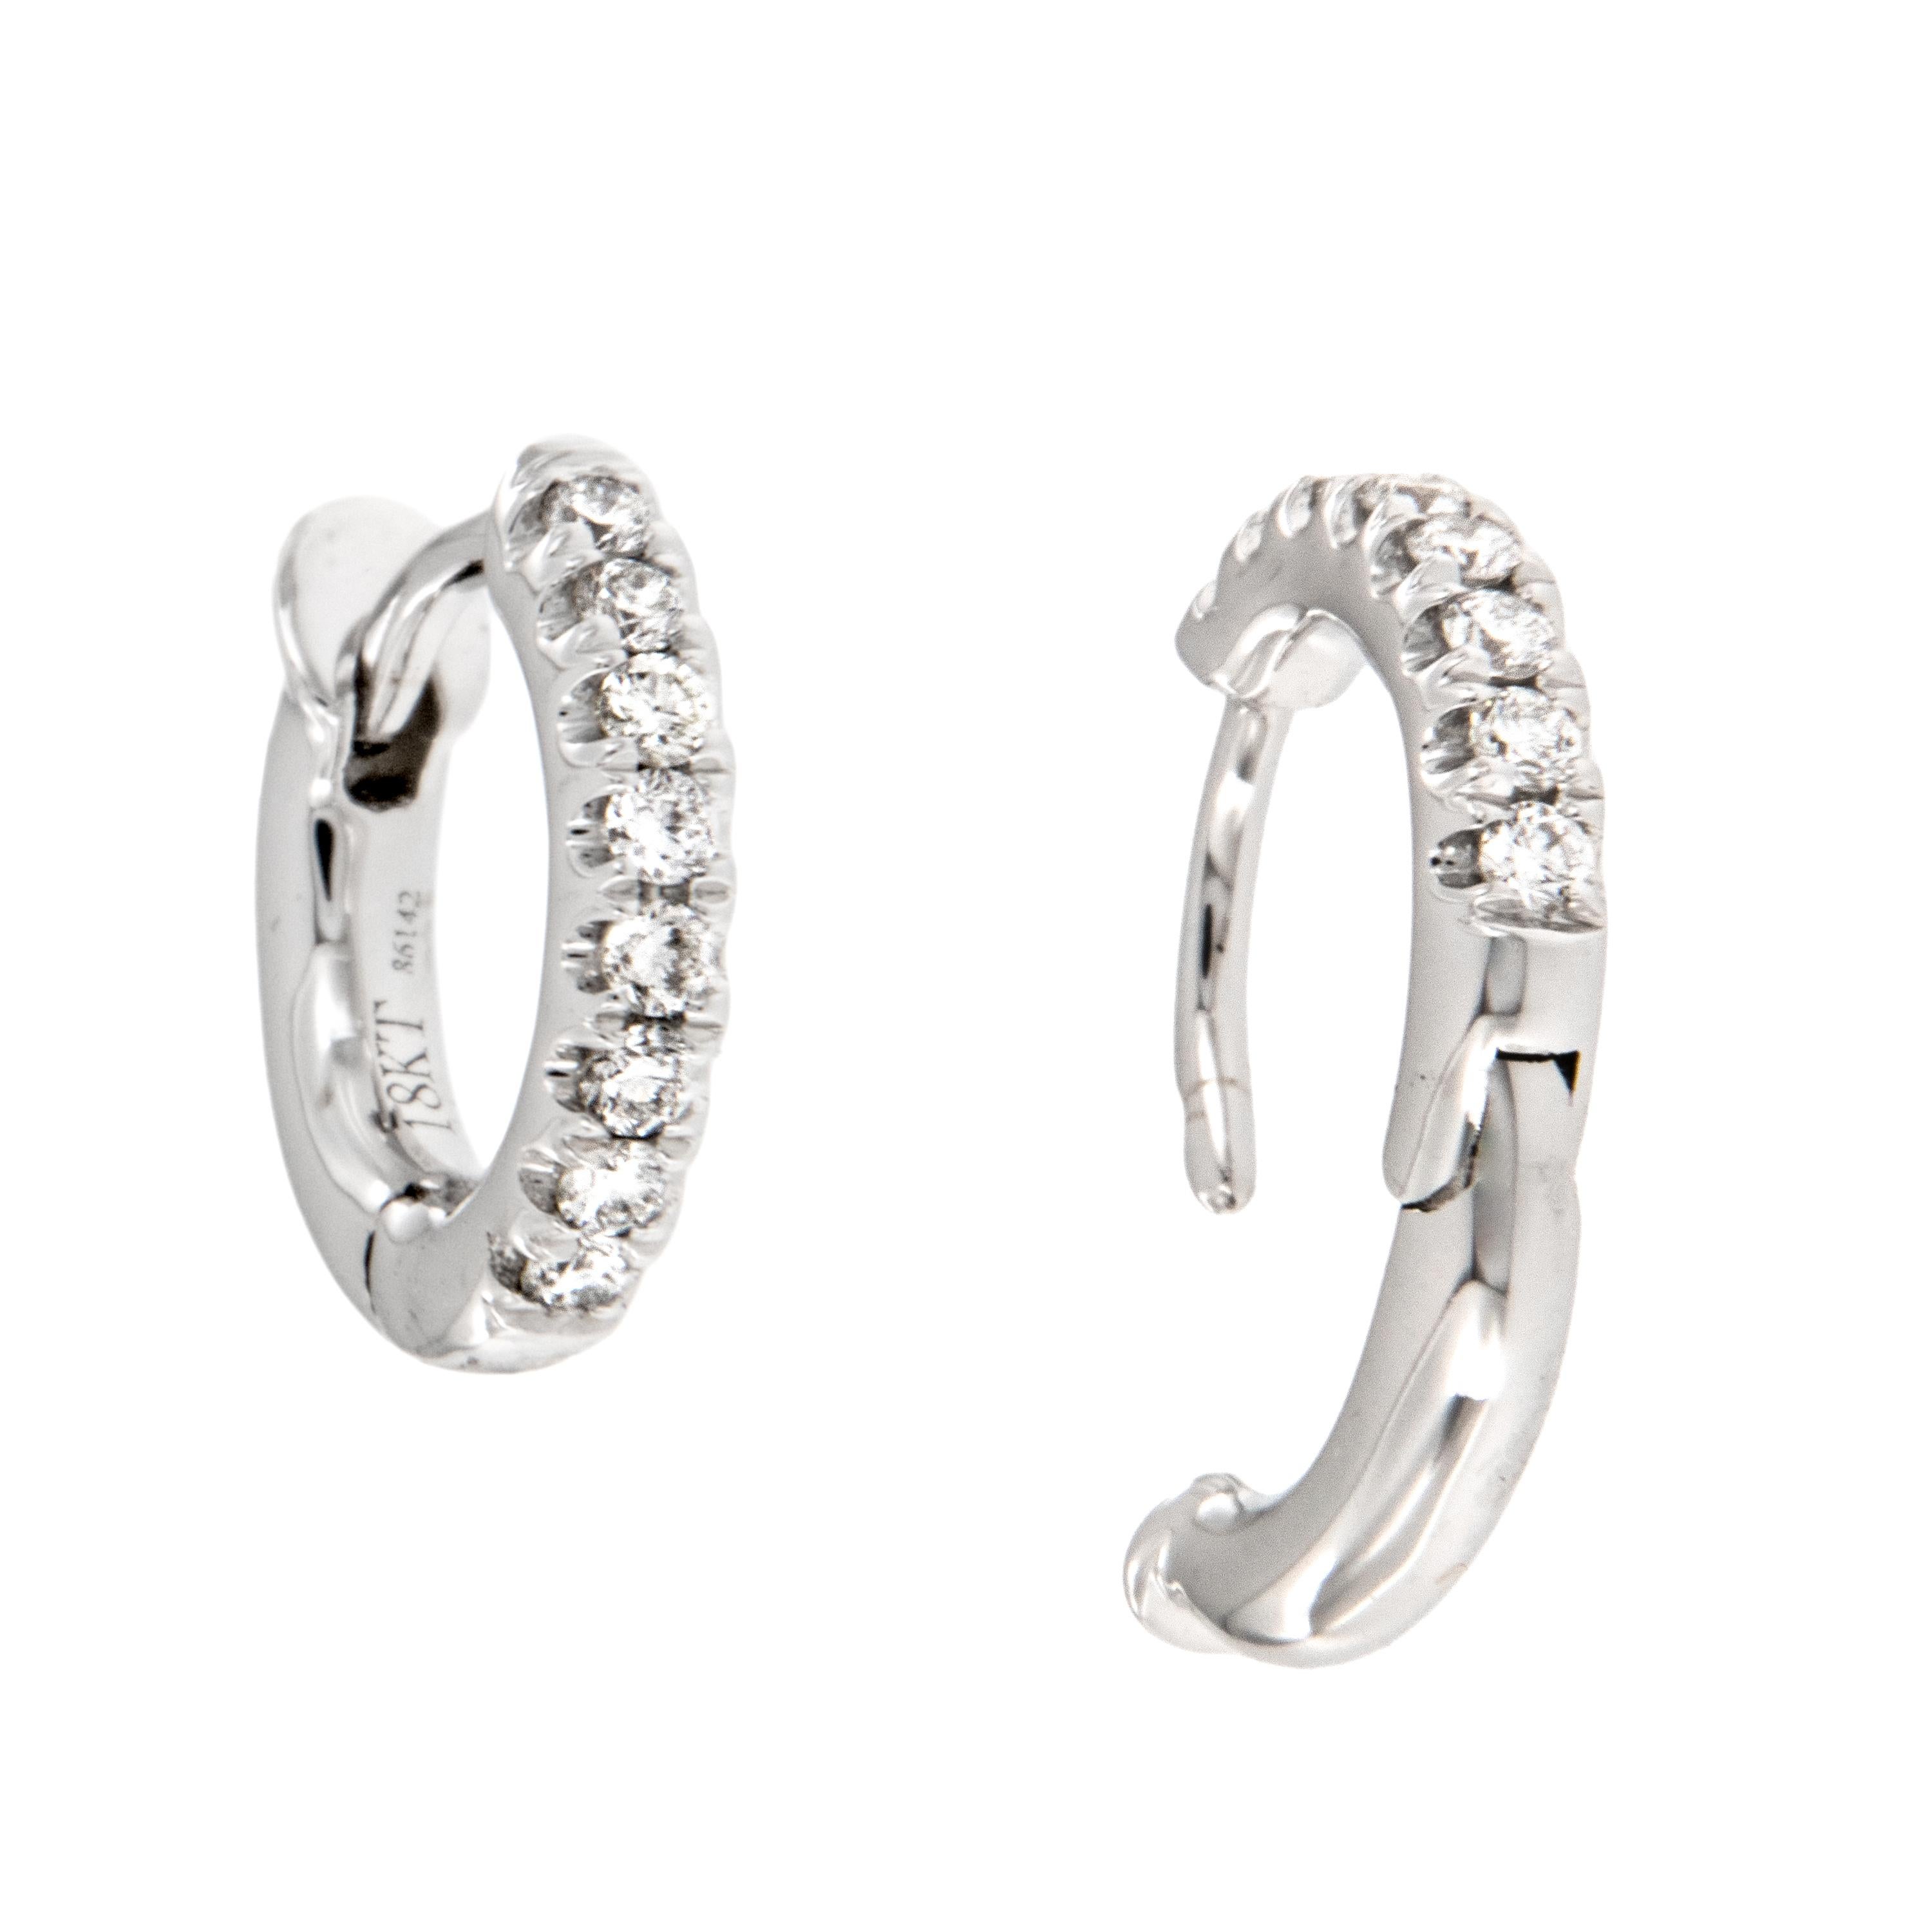 How adorable are these diamond hoop earrings? Perfect for you to wear every day or to the office, especially with no backing to poke your neck! Made from 18 karat white gold these mini diamond huggy hoops are set with 0.12 Cttw diamonds. They are